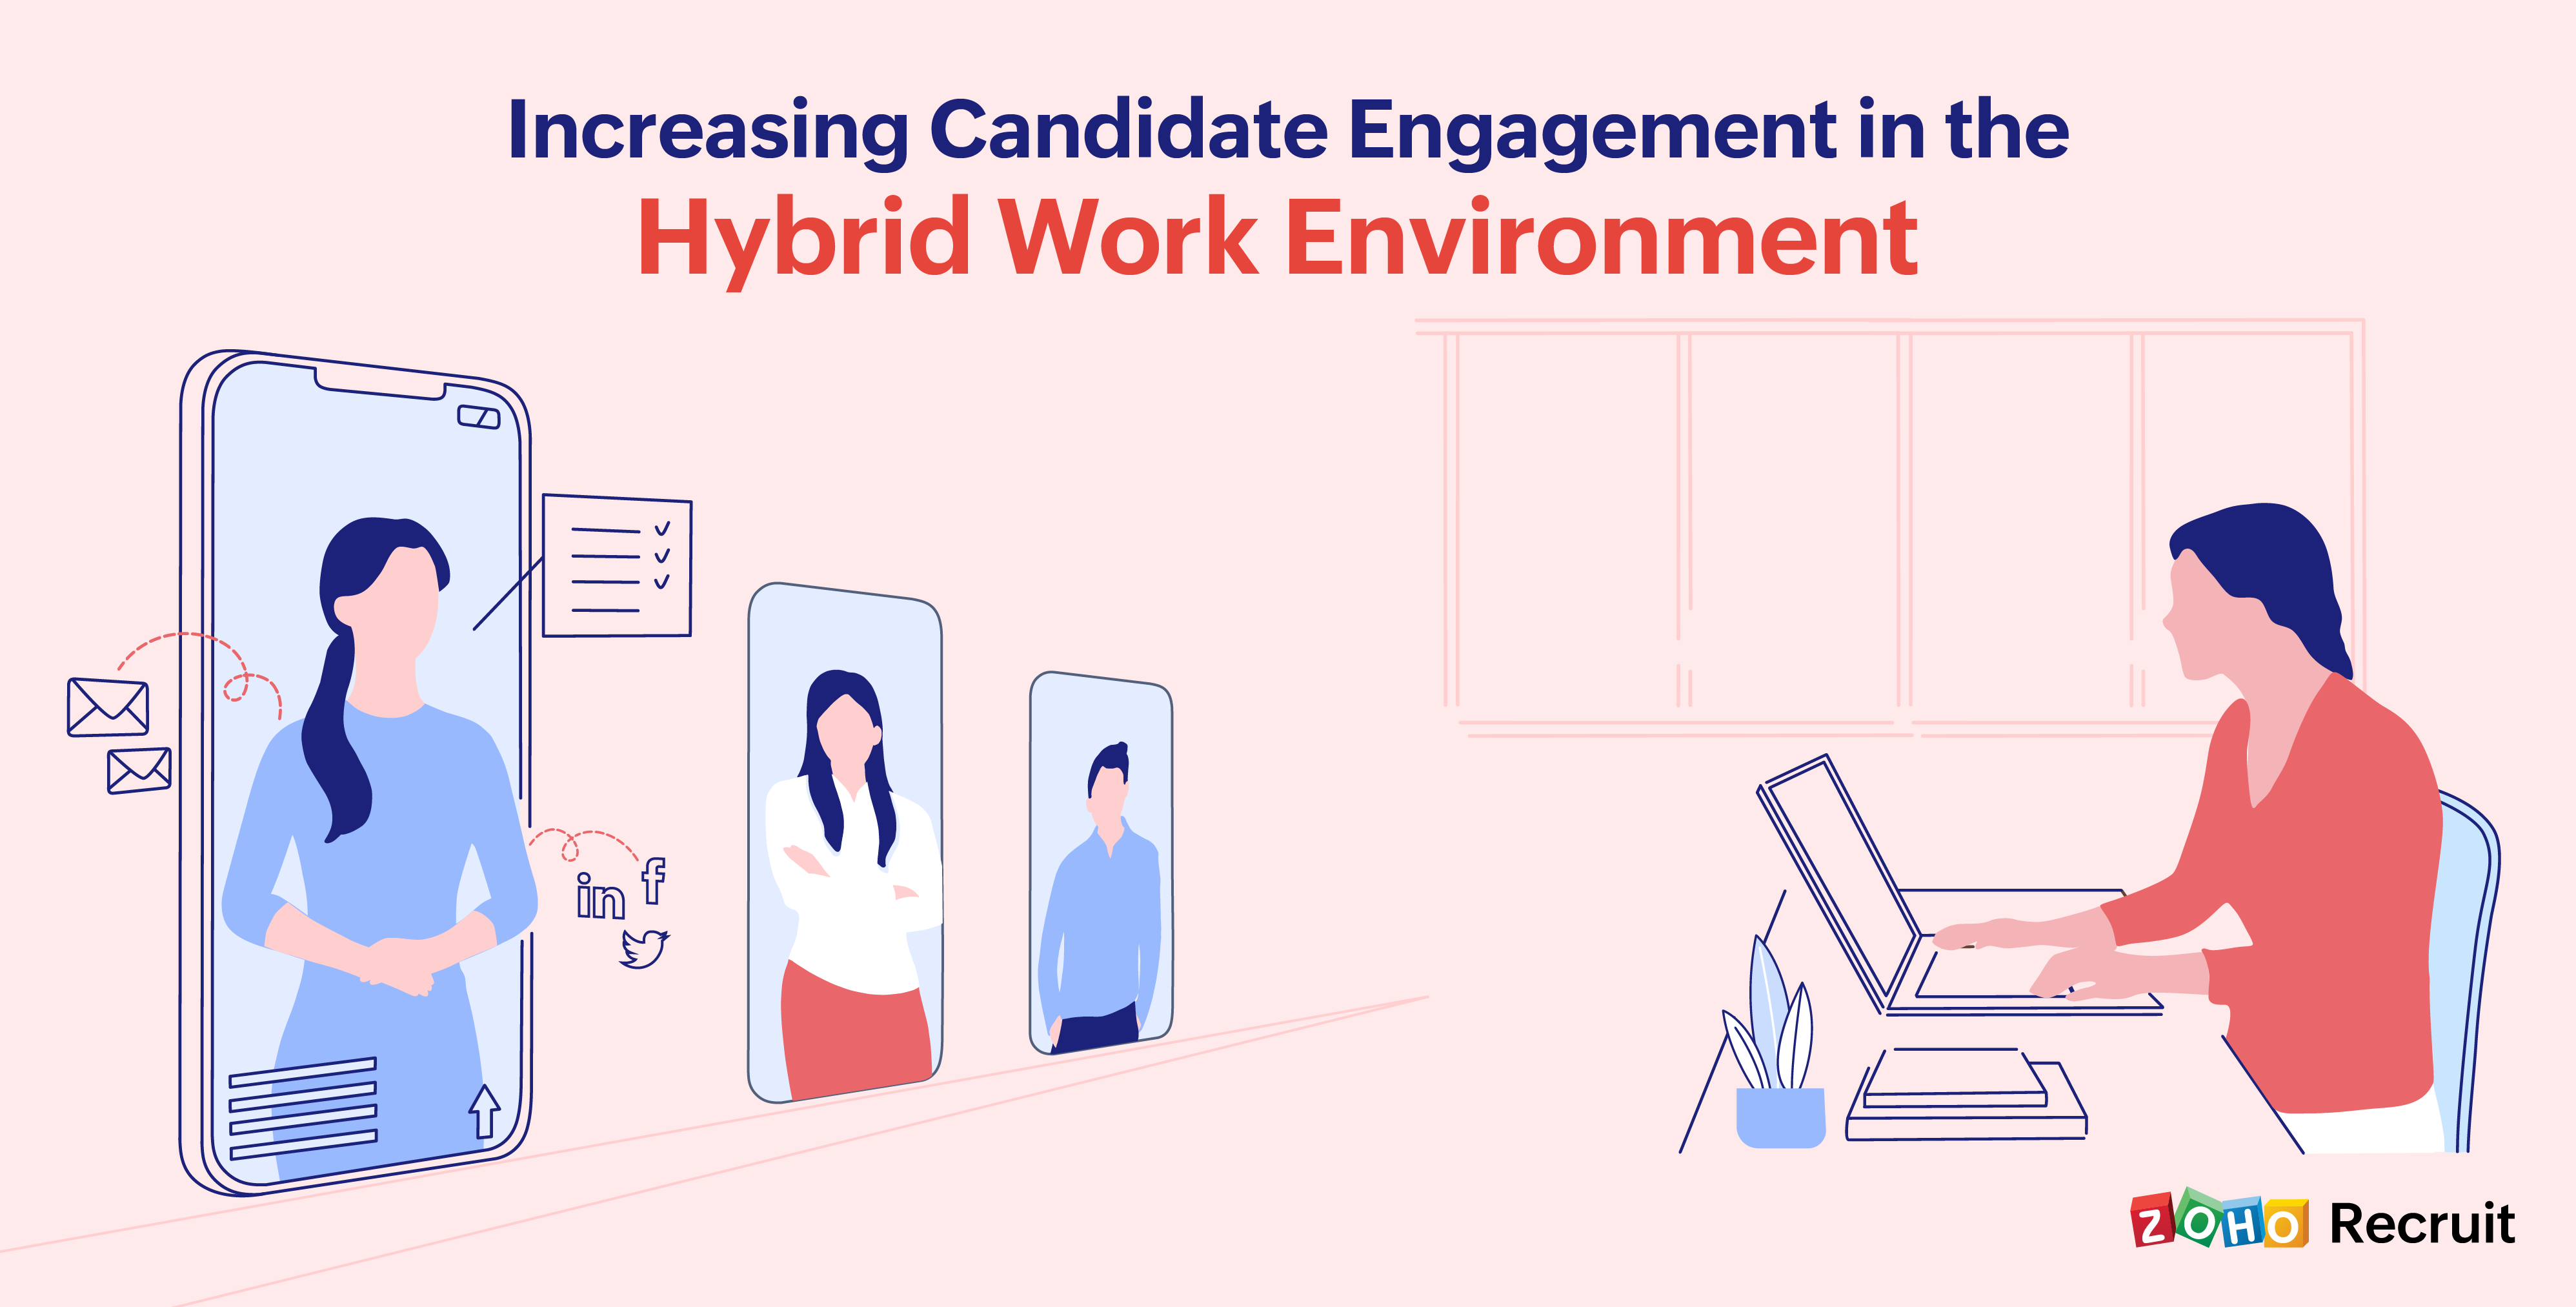 Increasing candidate engagement amidst hybrid work with recruitment software